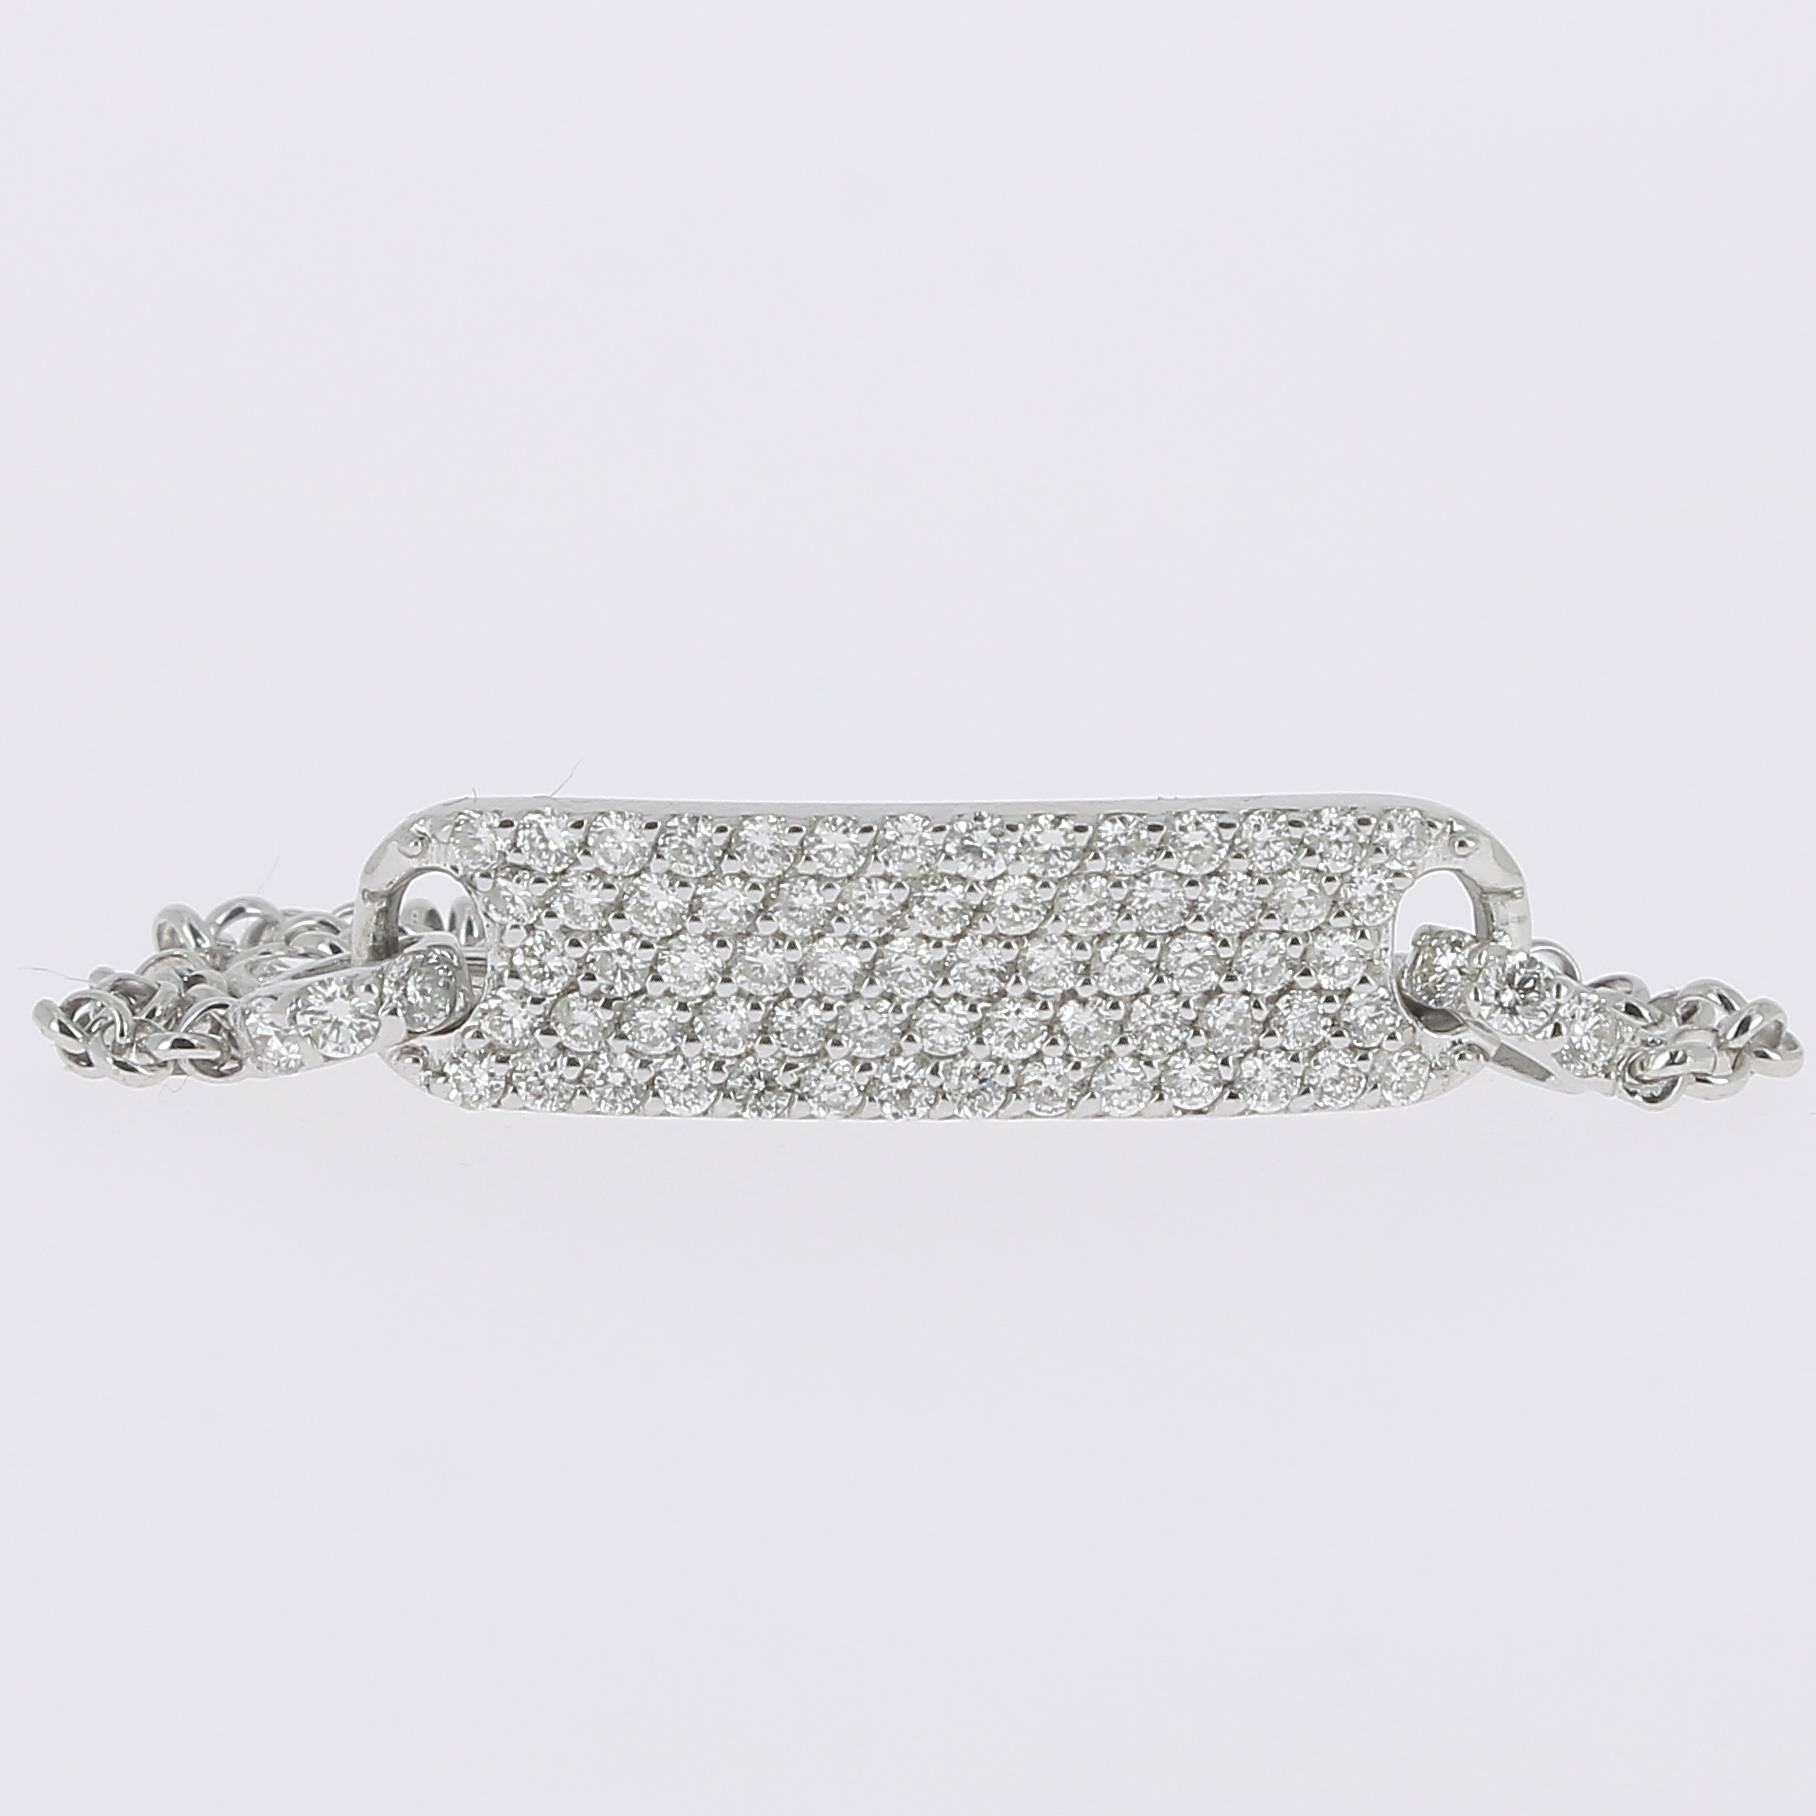 An amazing Tag Bracelet paved with diamonds weighing 0.60 carats, hanging on a chain bracelet.
Clasp with several links to adjust the size on the wrist.
The Diamonds are GVS qualities.
The Modern Bracelet weight 4.3 Grams (g).
The Bracelet is 18K